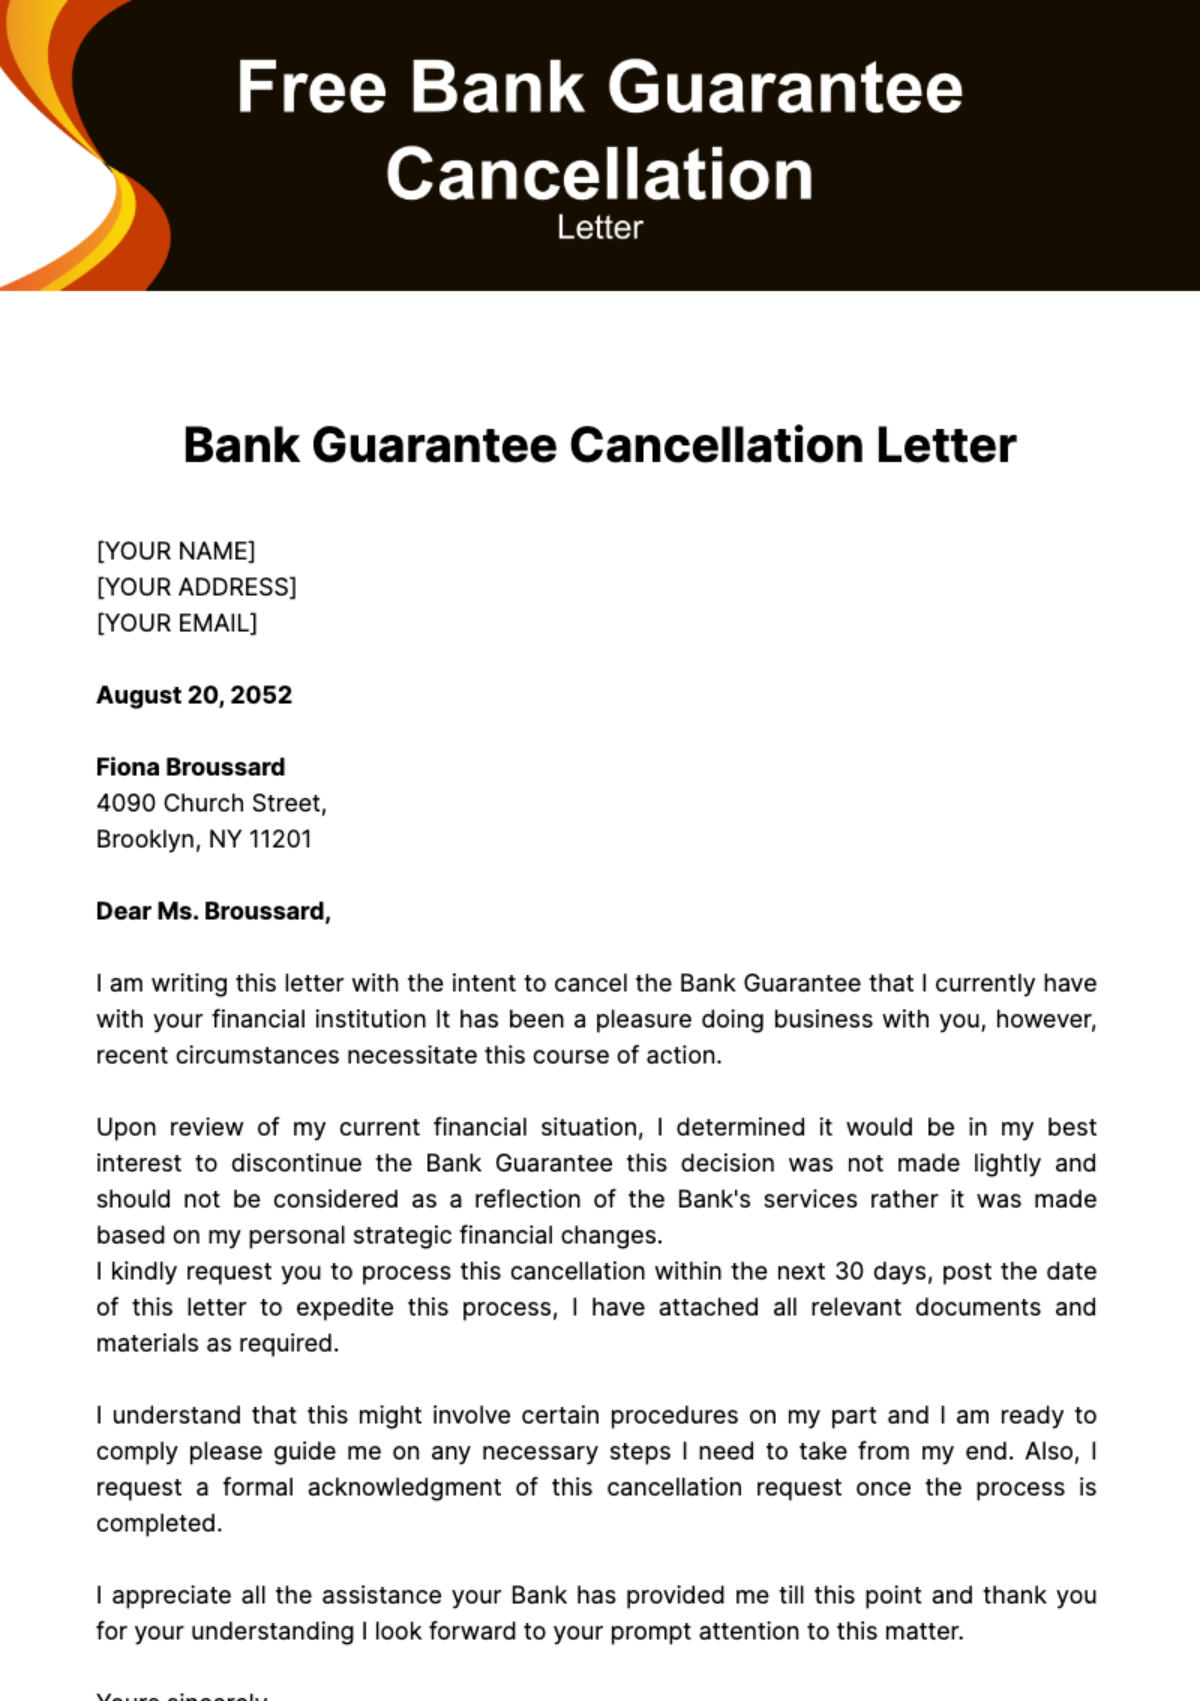 Free Bank Guarantee Cancellation Letter Template